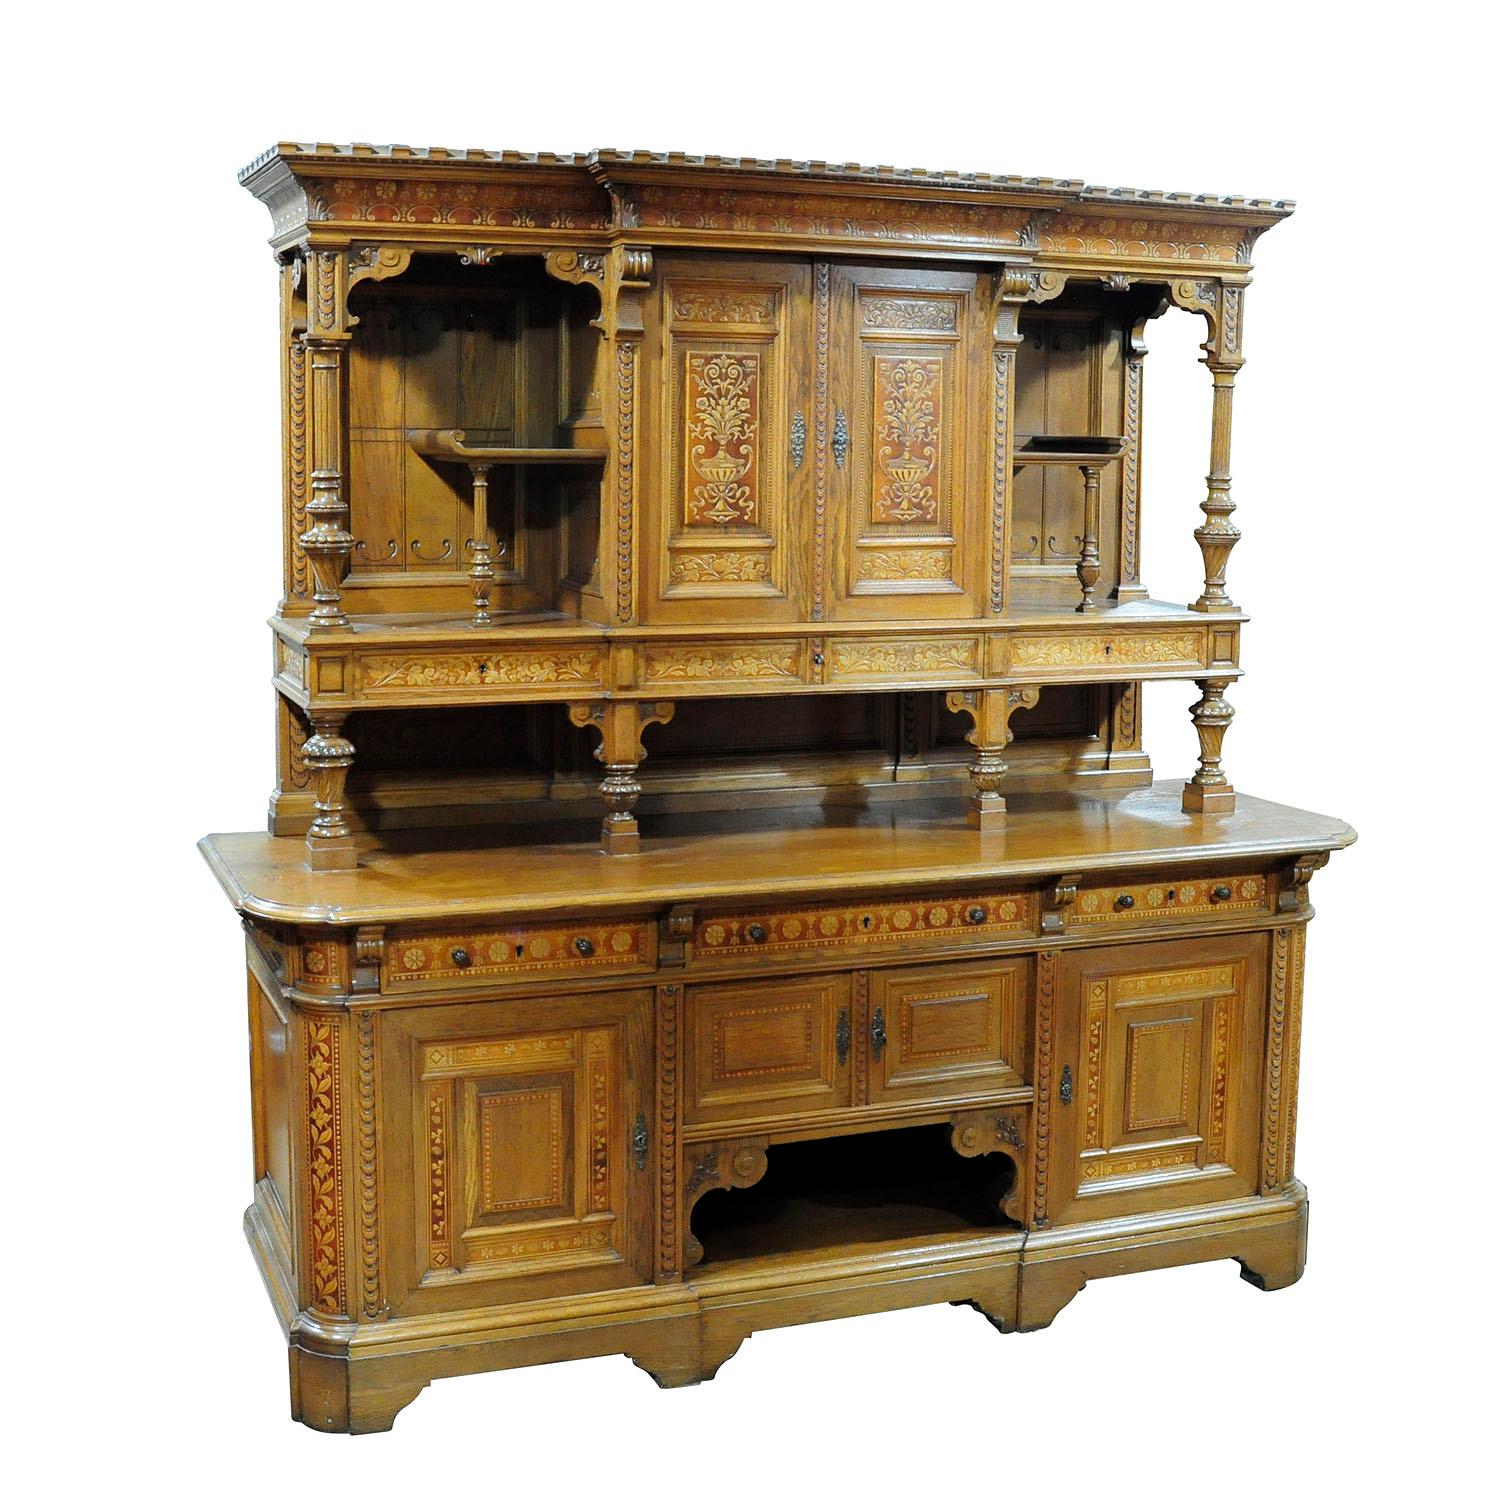 A Large Sideboard by Bernhard Ludwig Vienna ca. 1900

A large Victorian oak wood side board with great decorations. Manufactured by the Royal Warrand Holder Bernhard Ludwig, Vienna. Austria ca. 1900. Depending on the place of delivery, the transport